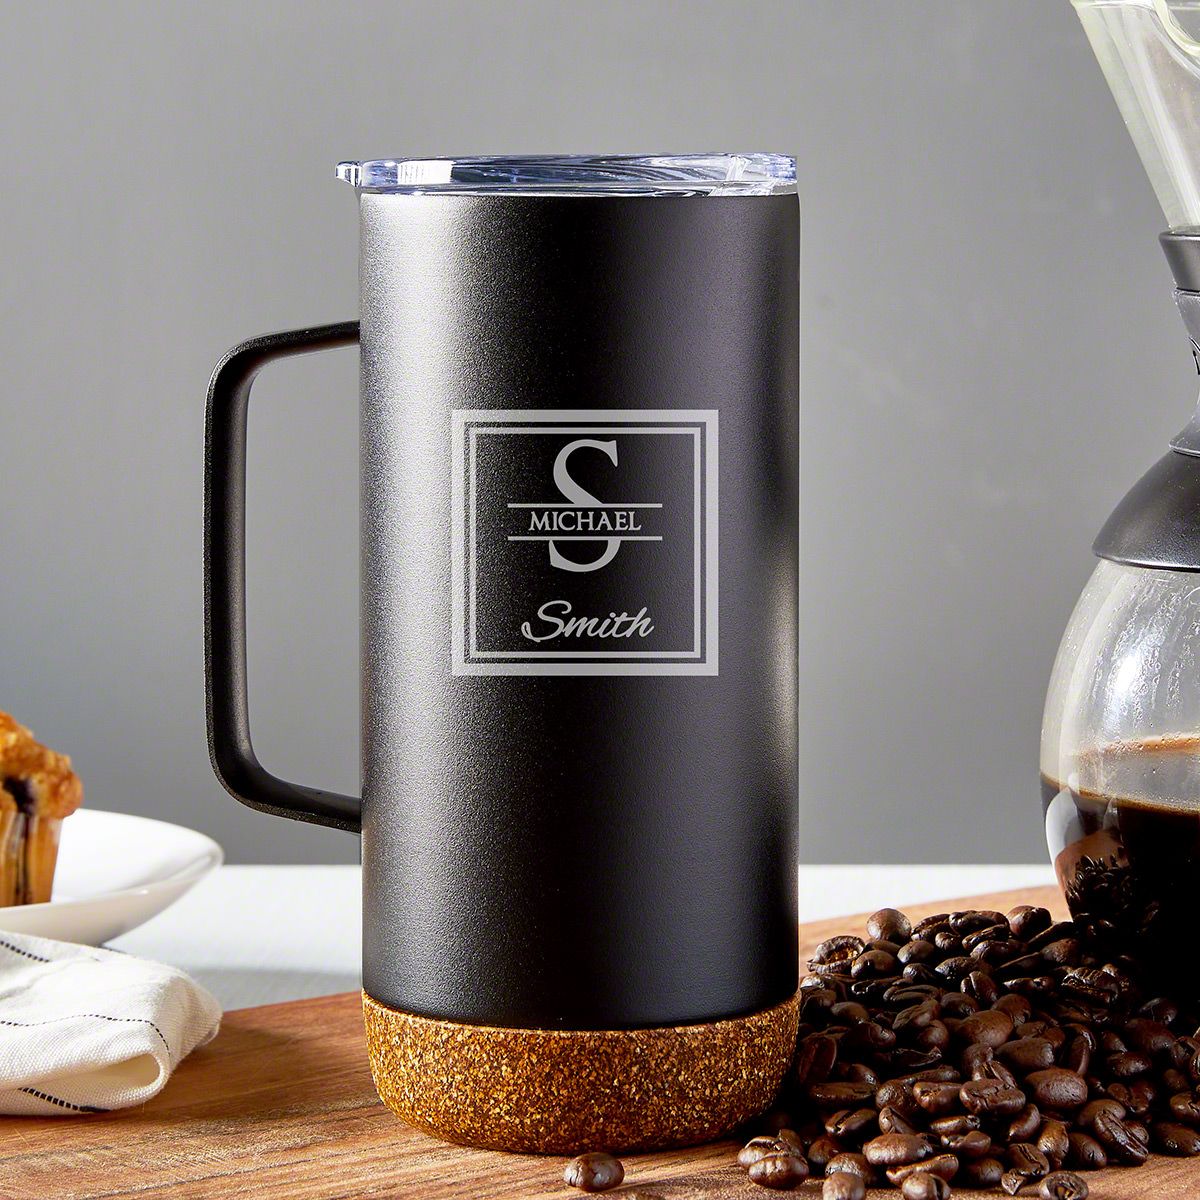 https://images.homewetbar.com/media/catalog/product/o/a/oakhill-black-personalized-insulated-coffee-mug-with-handle-16-oz-p_10209.jpg?store=default&image-type=image